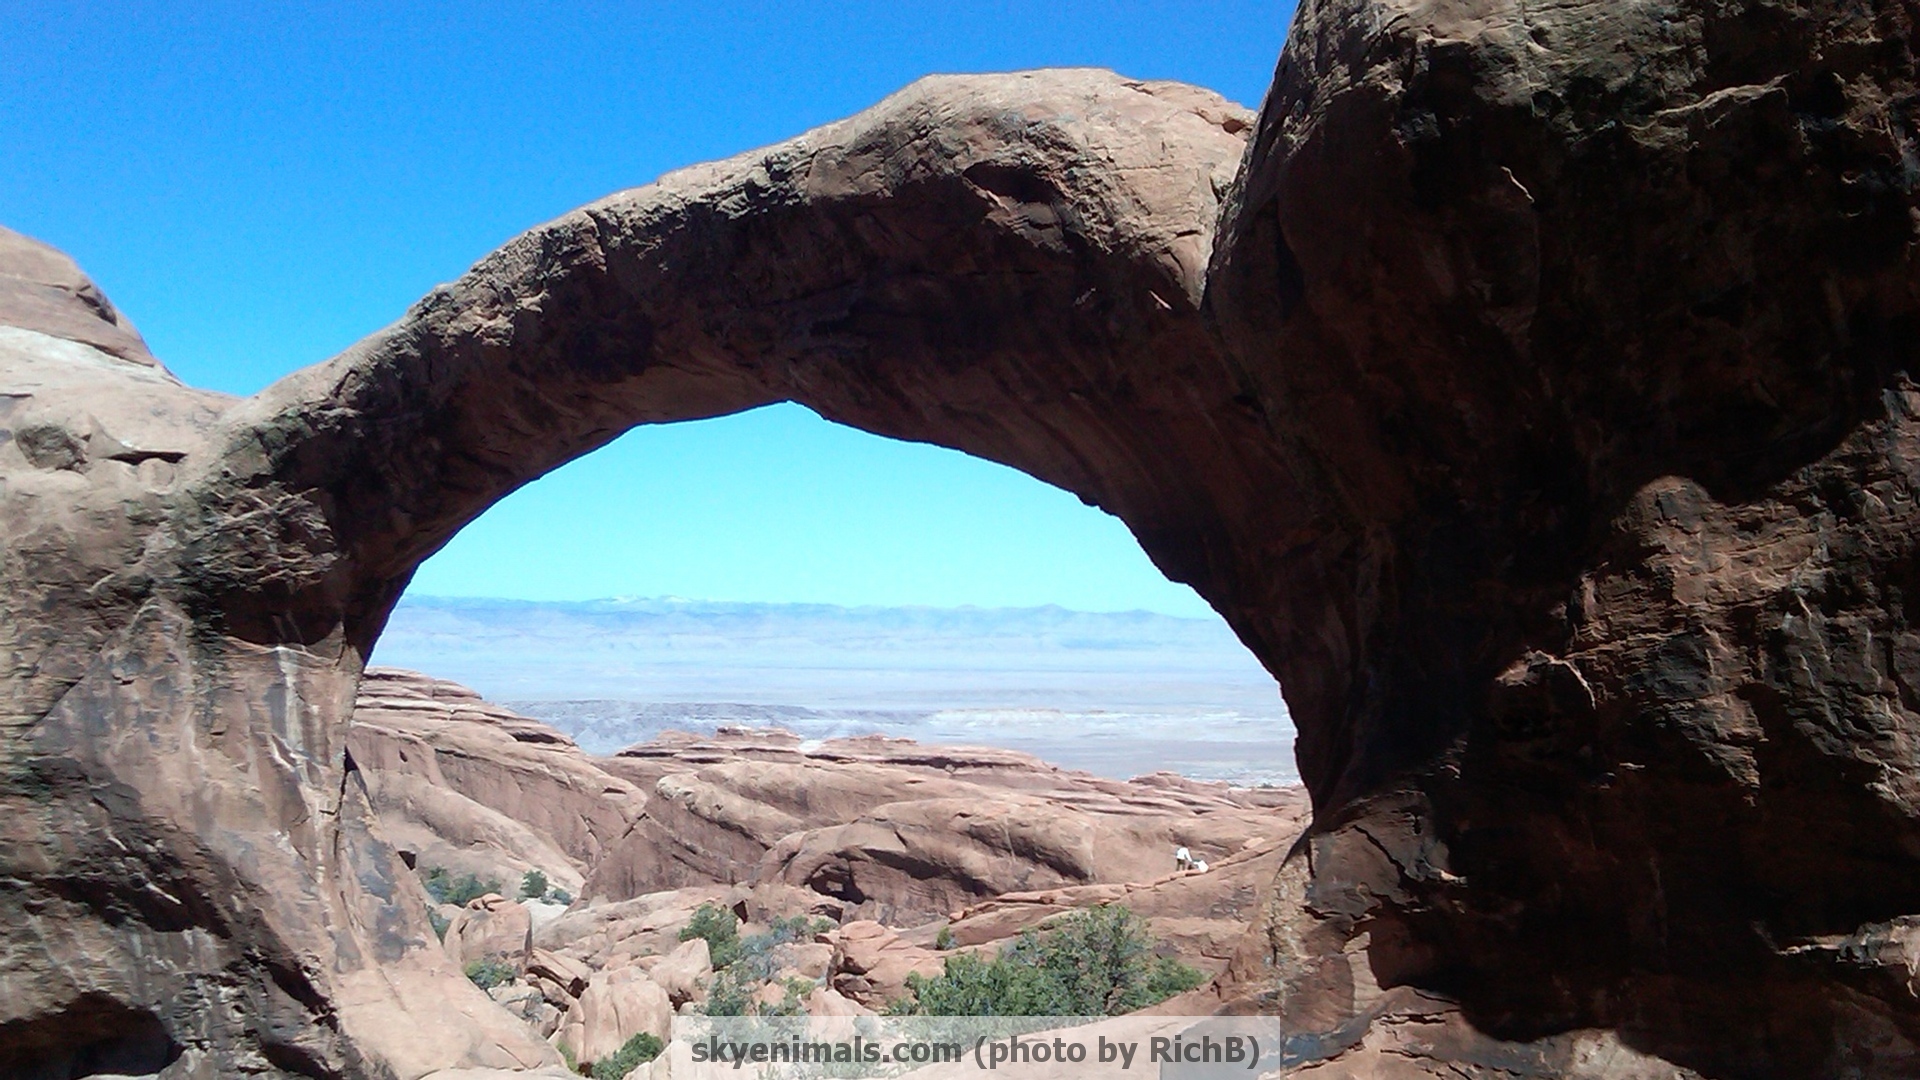 Arches National Park Wallpapers